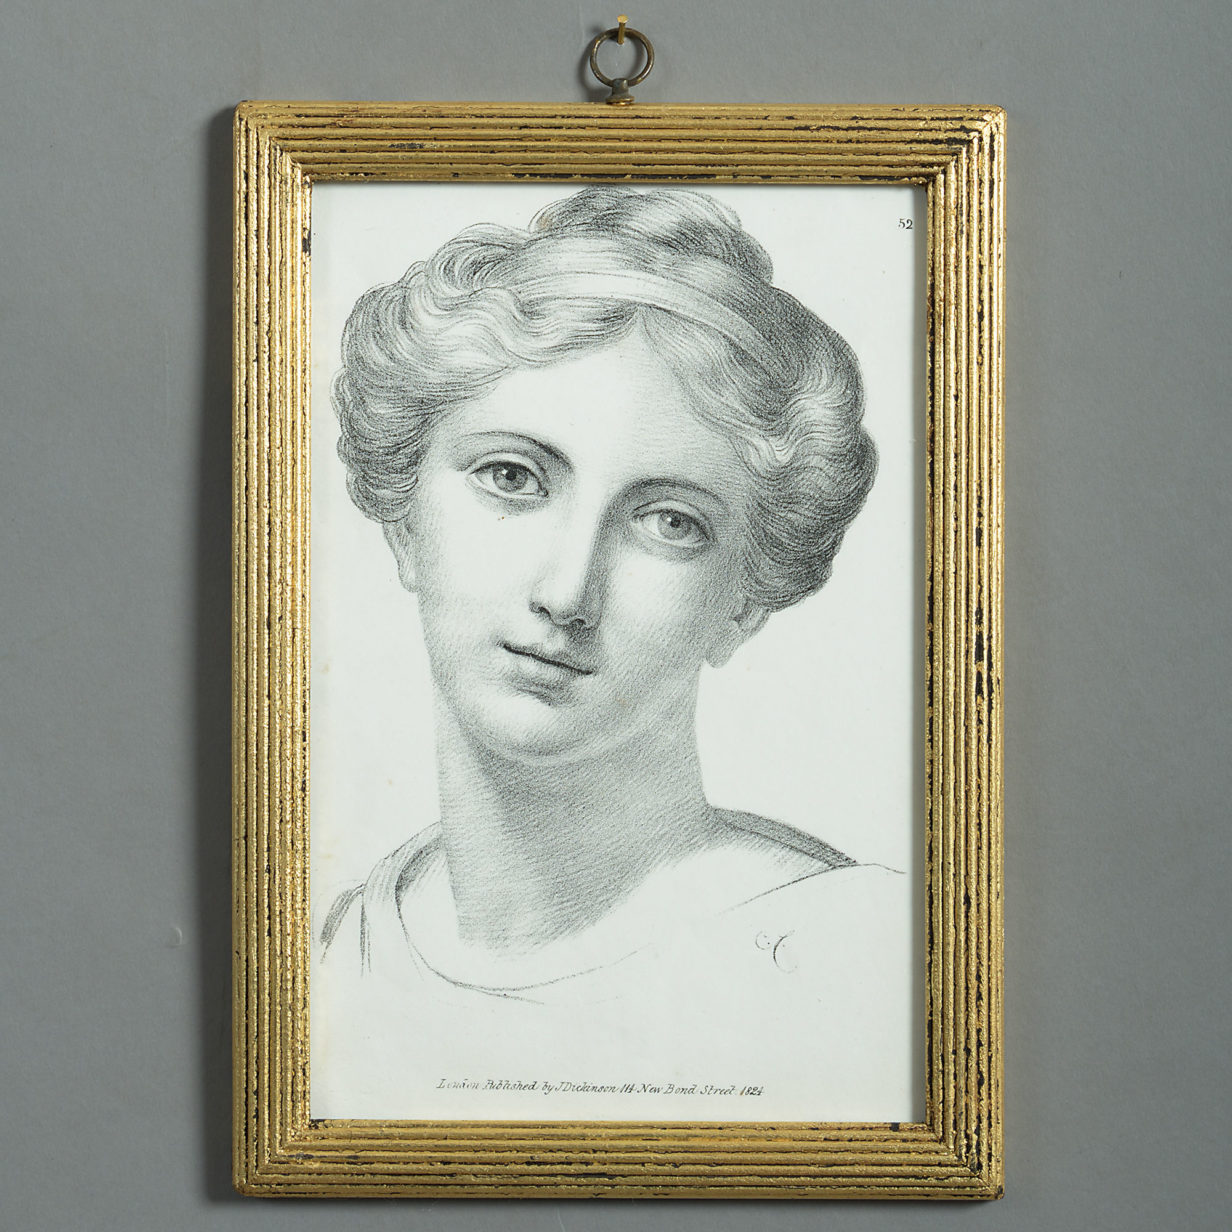 Twelve early 19th century portrait etchings in the classical manner